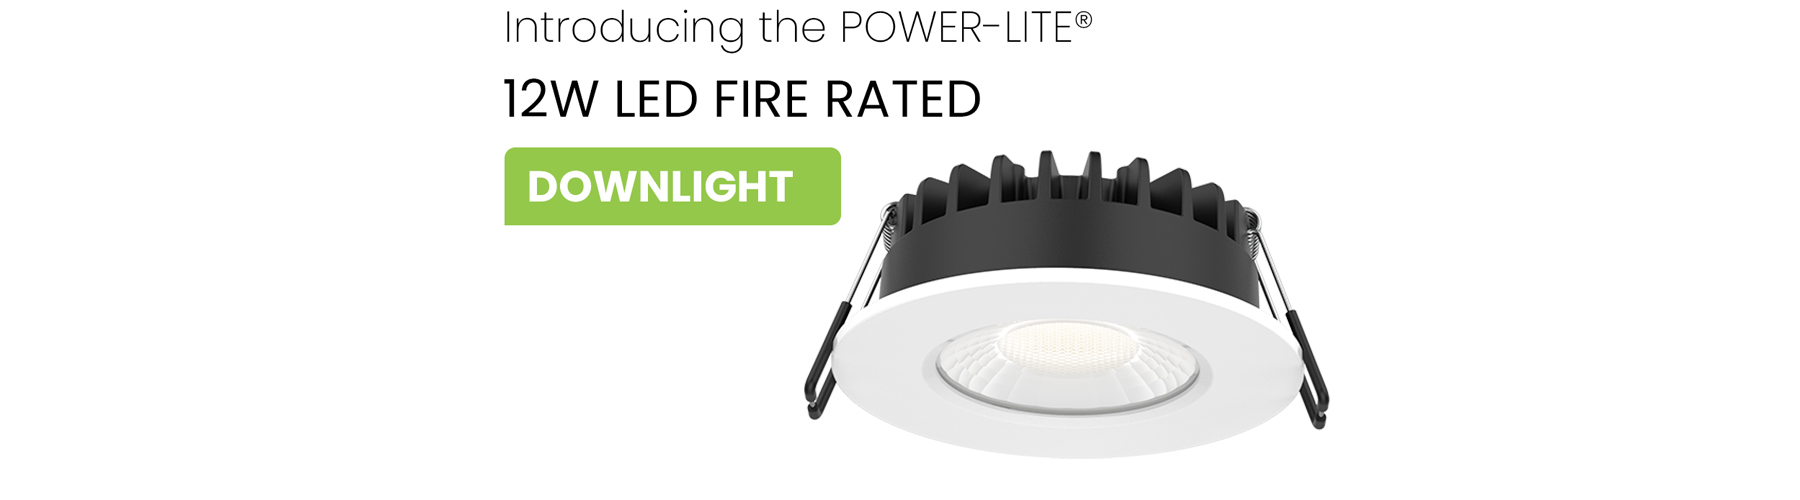 New Product Launch  |  12W LED Fire Rated Downlight